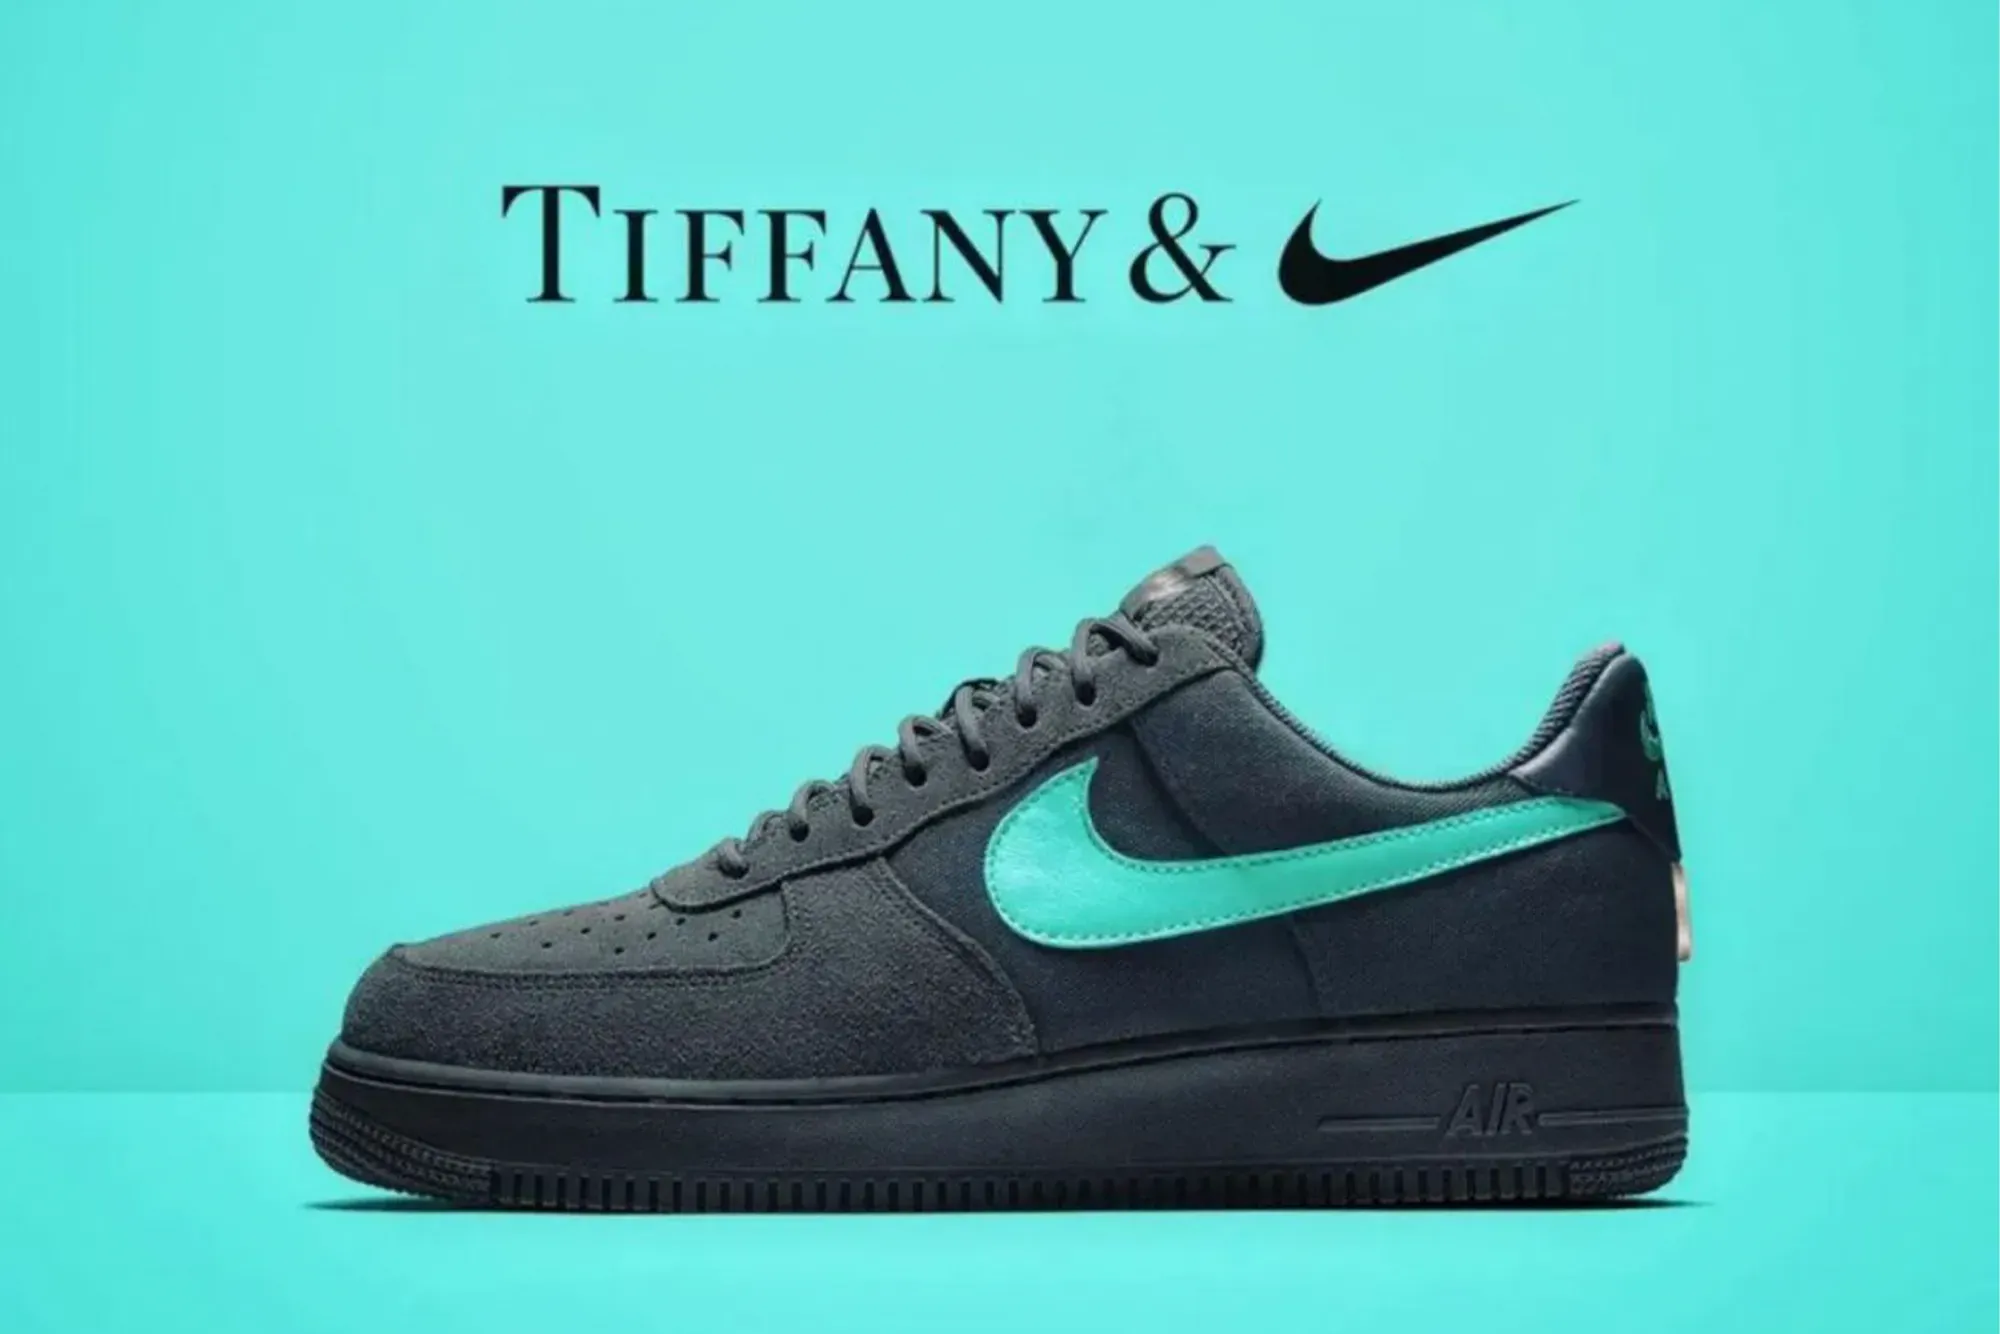 The 1837 Collection Tiffany x Nike Air Force 1 Fails - Popdust